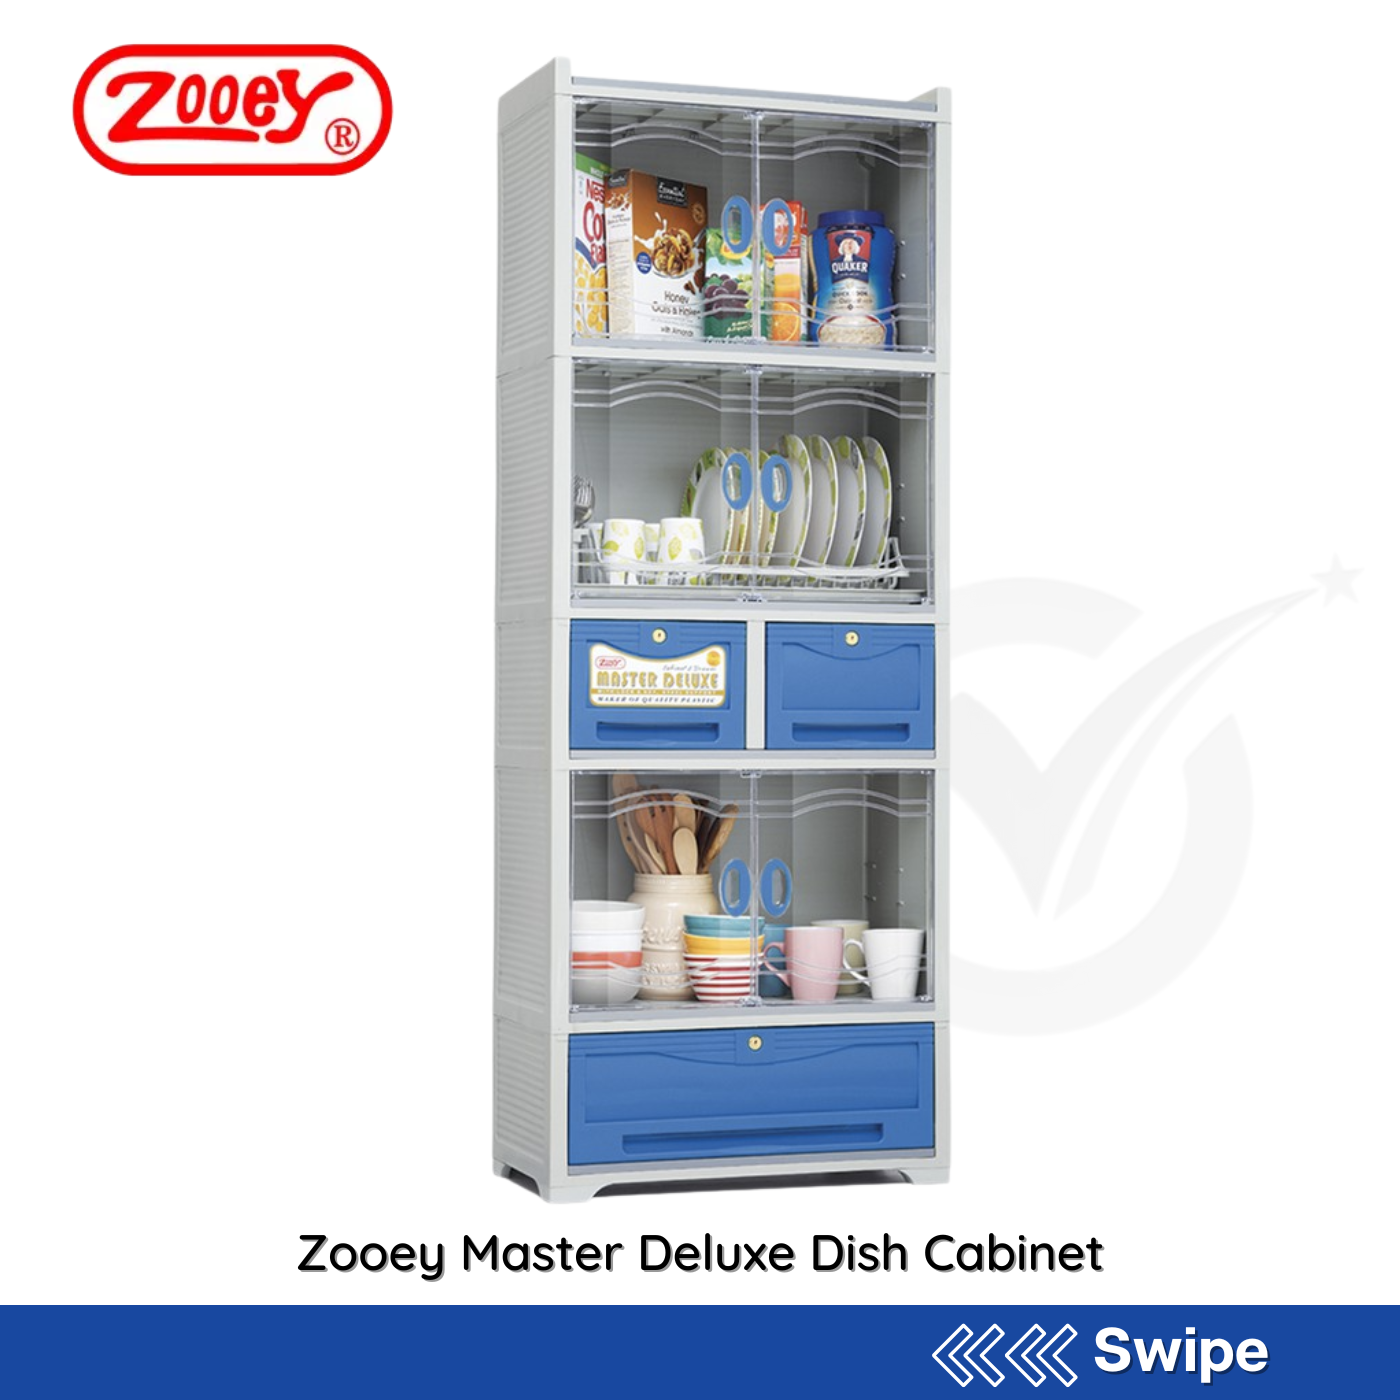 Zooey Master Deluxe Dish Cabinet - People's Choice Marketing